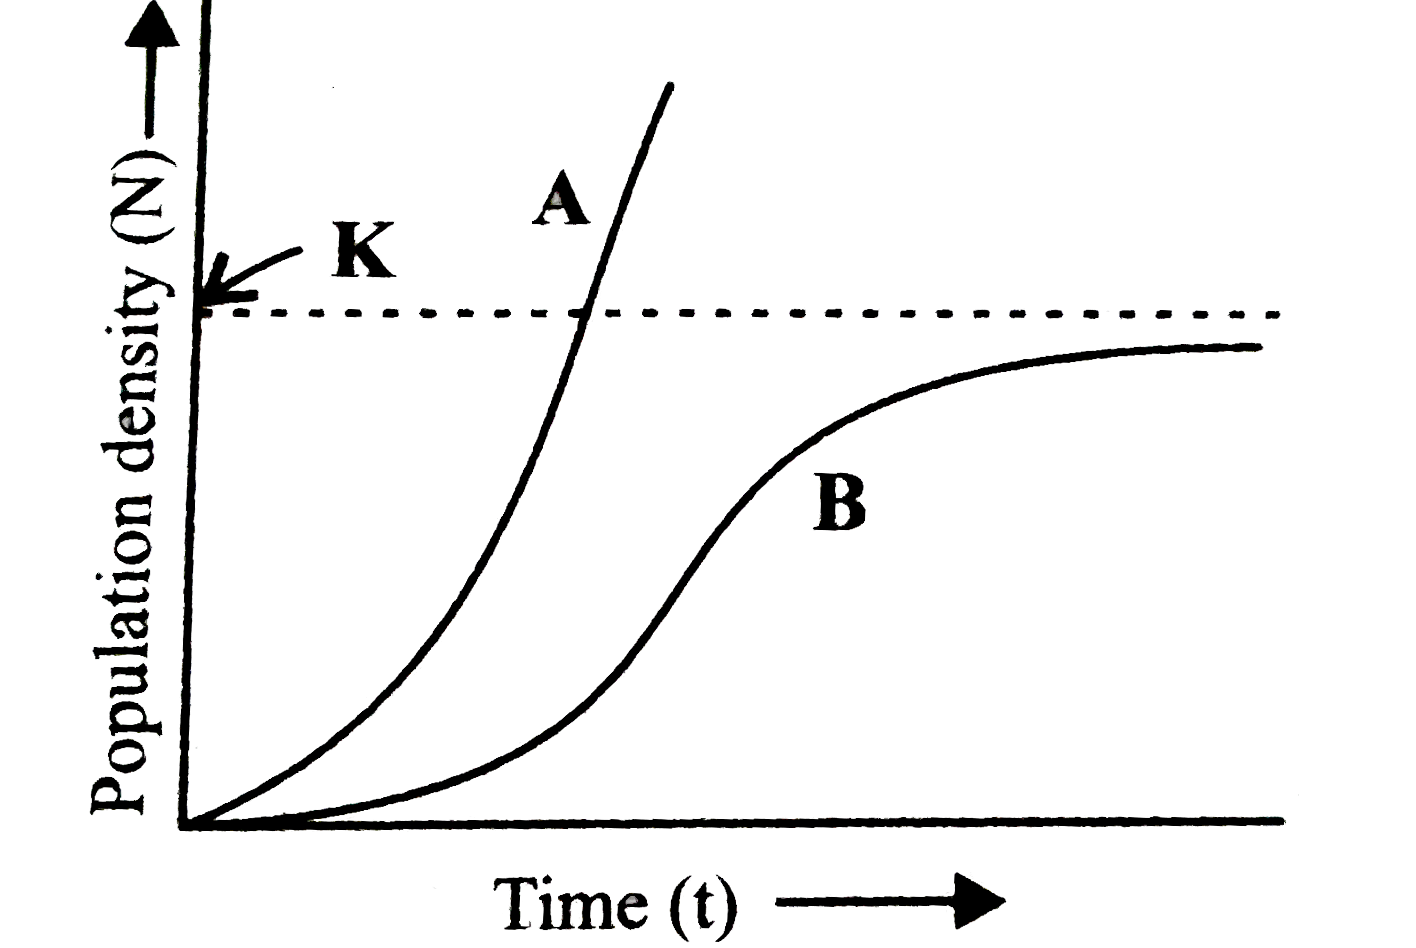 Study the population growth curves (A and B) in the given graph and select the incorrect option.